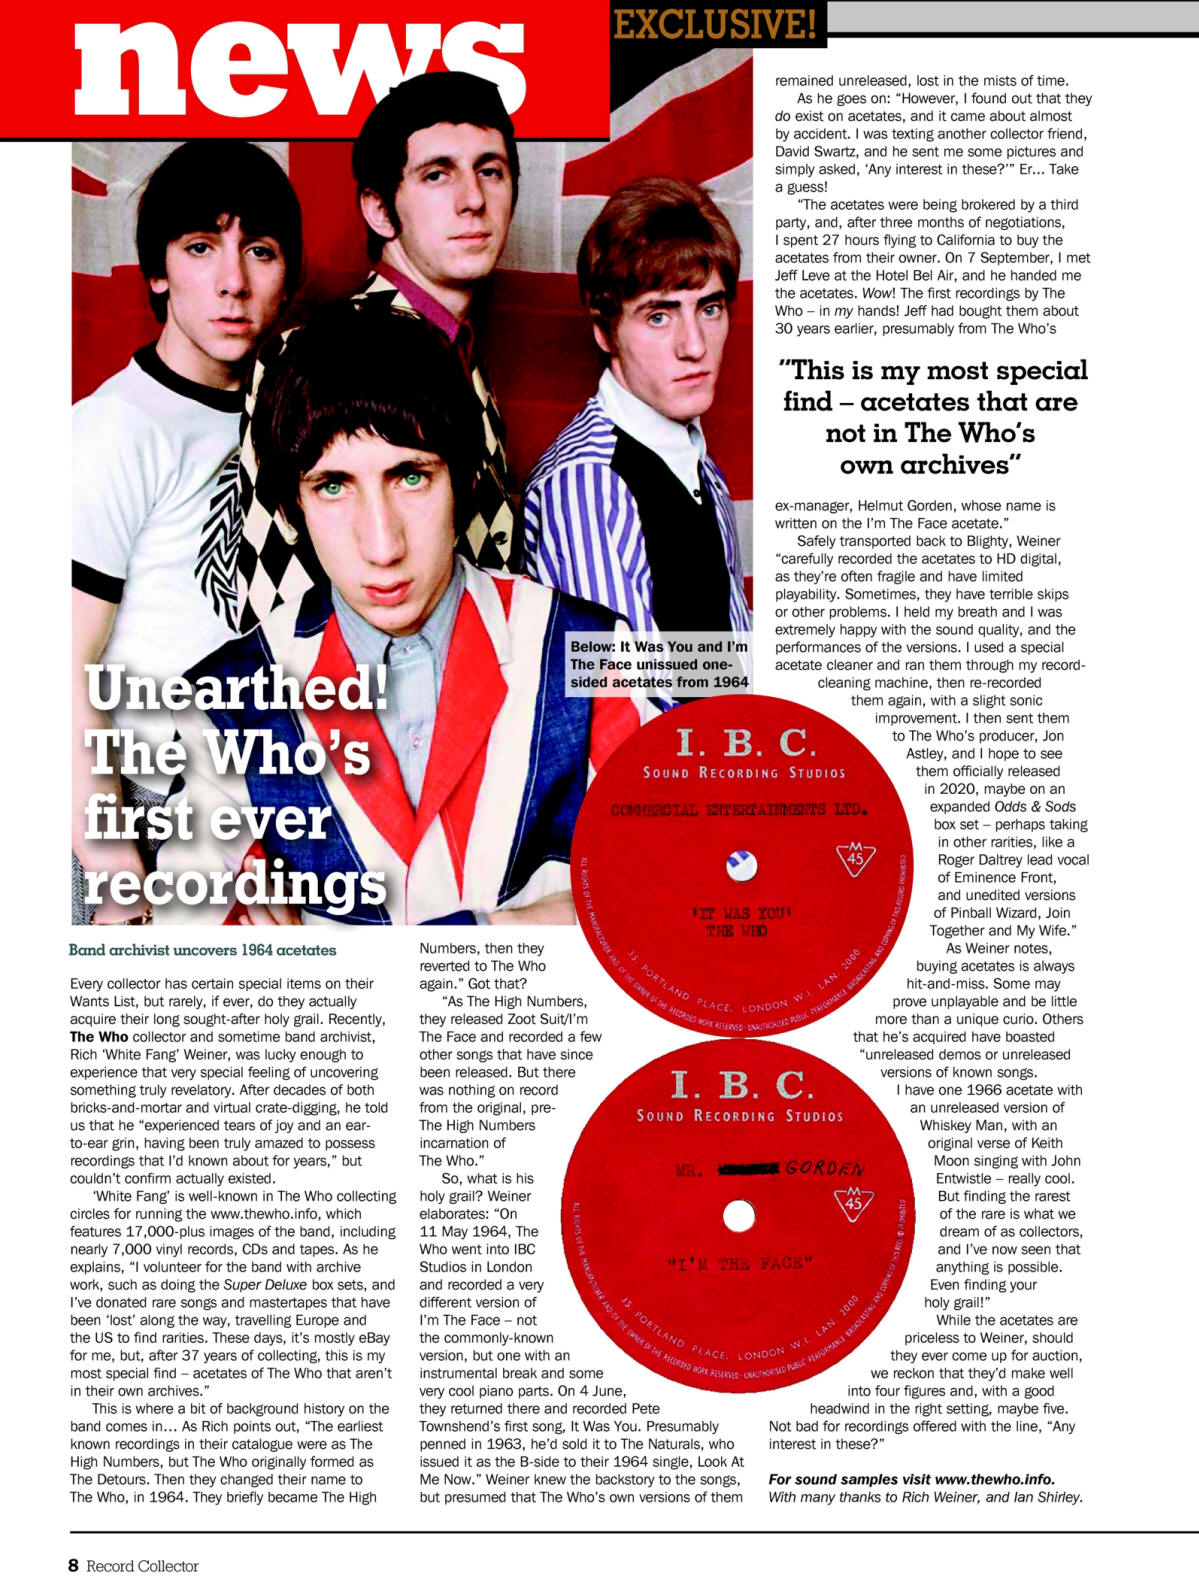 The Who - Record Collector Magazine - December, 2019